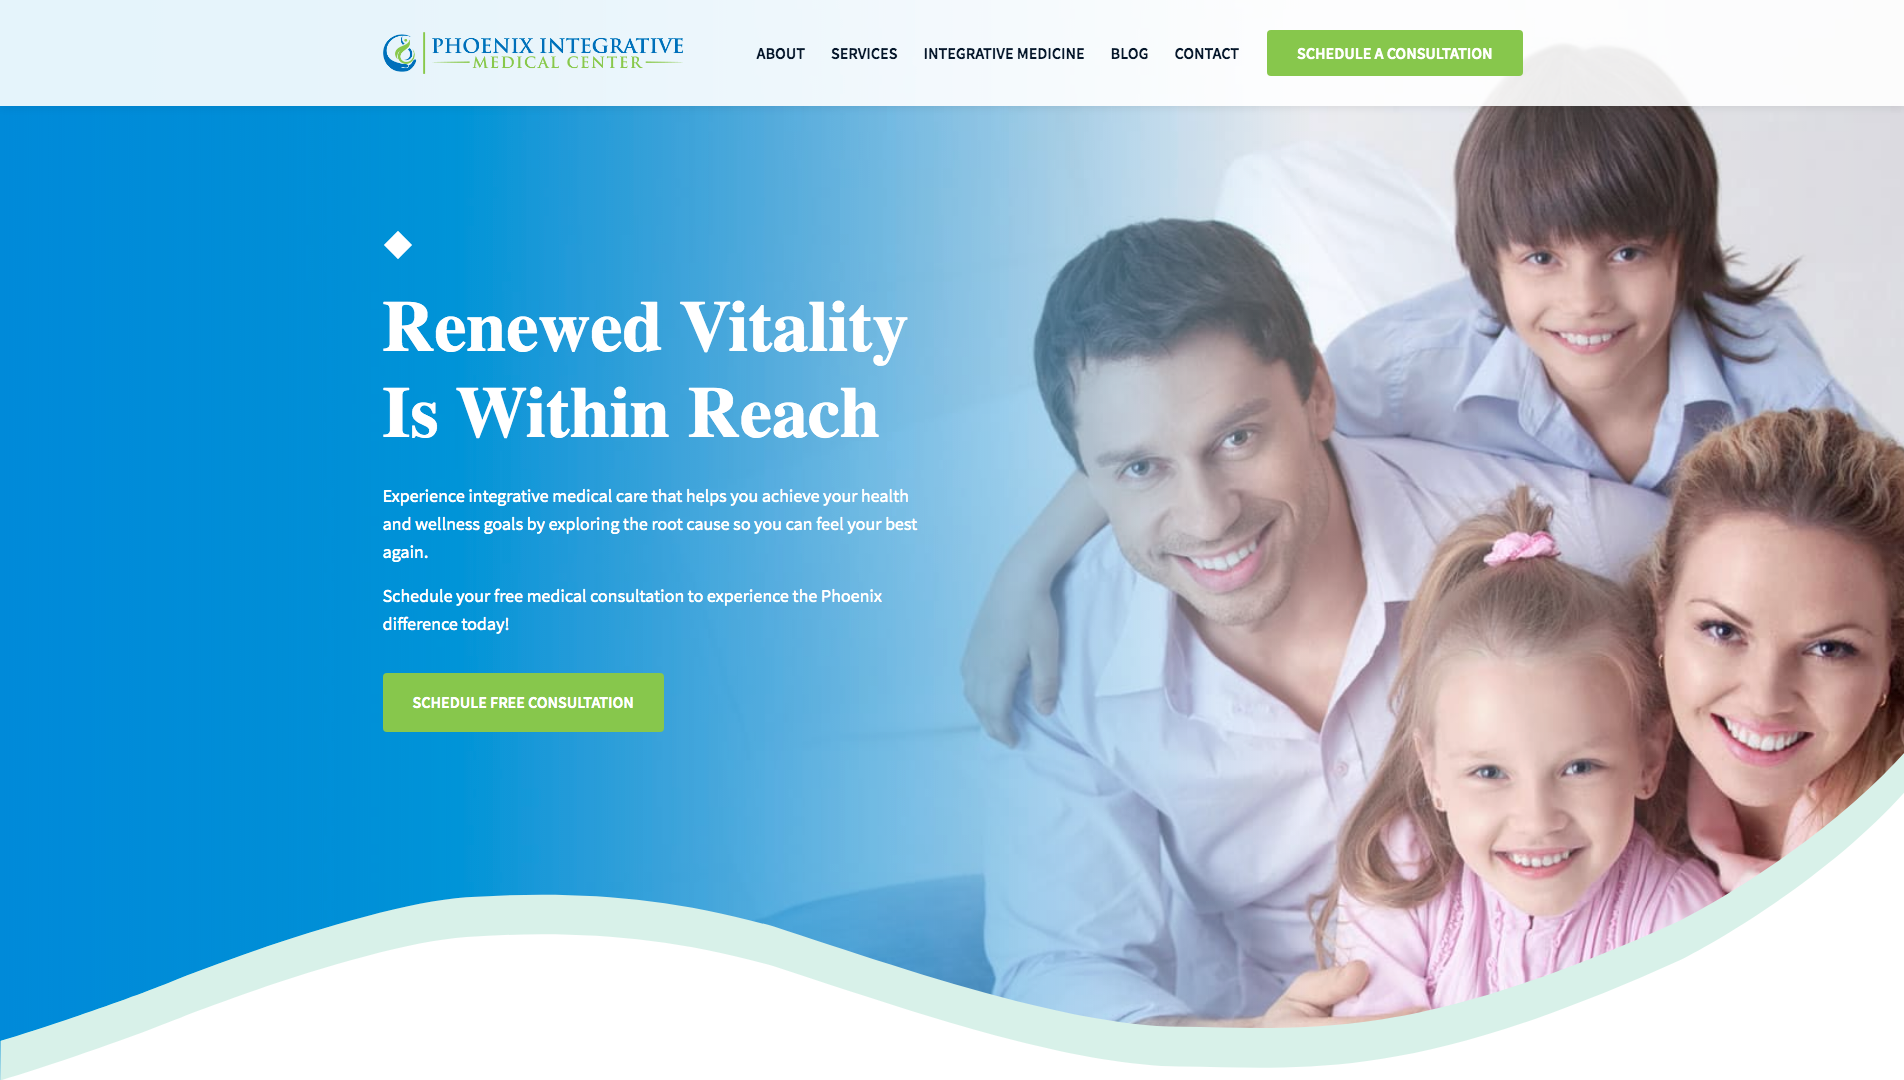 How Phoenix Integrative Refreshed Their Brand and Gained More Patients